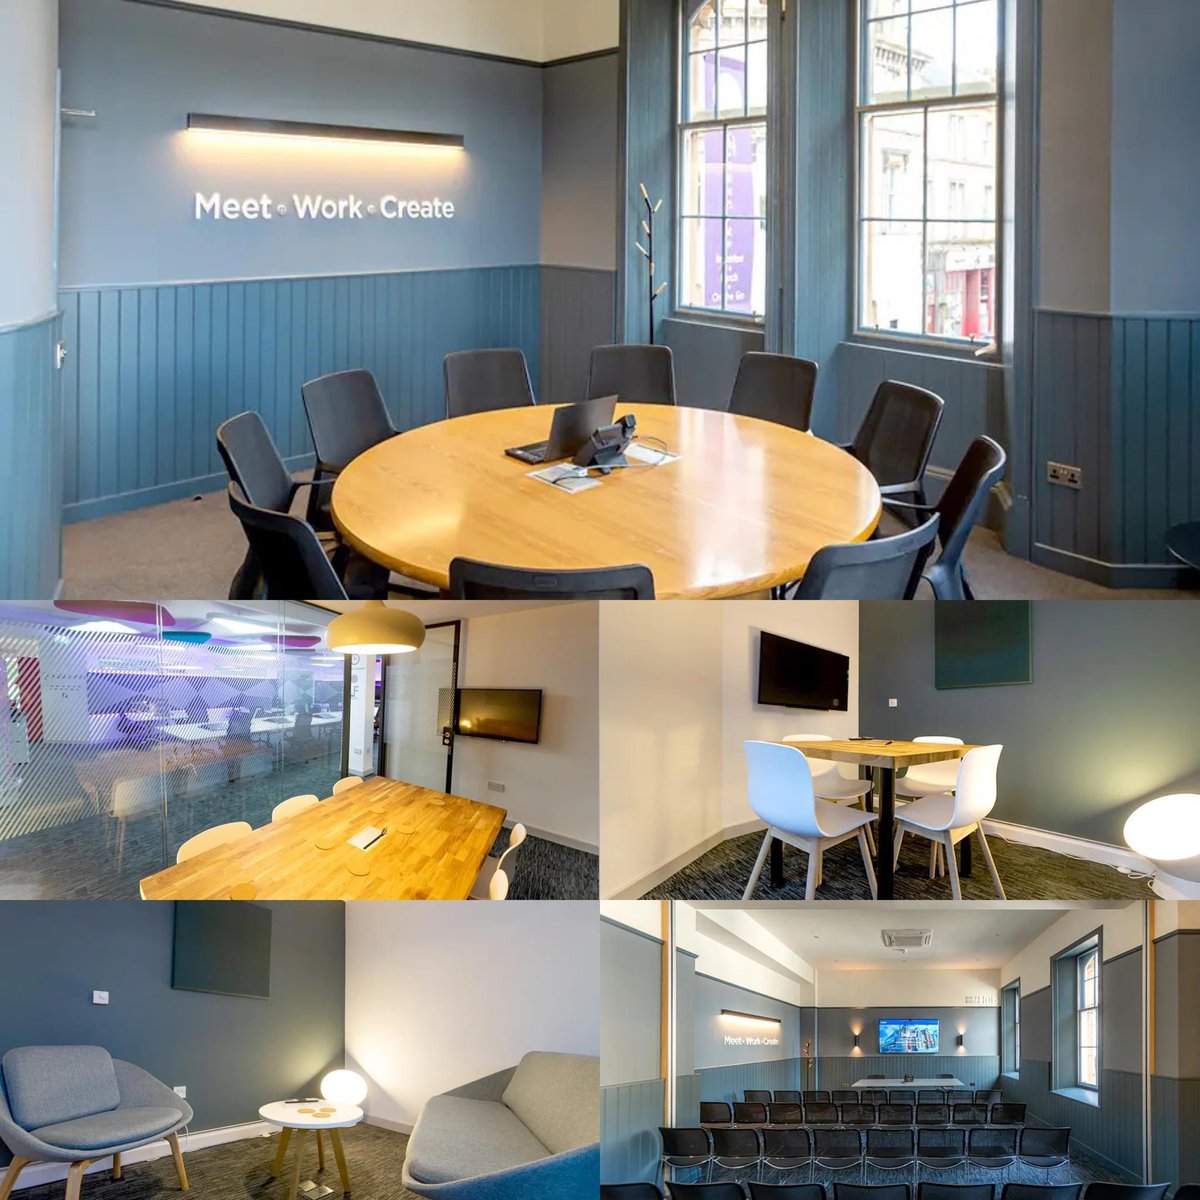 Need a professional space for your meetings? Our meeting rooms have everything you need to host presentations and discussions. 

Book now at falkirkbusinesshub.co.uk

#MeetingRooms #FalkirkBusinessHub #MeetWorkCreate #Falkirk